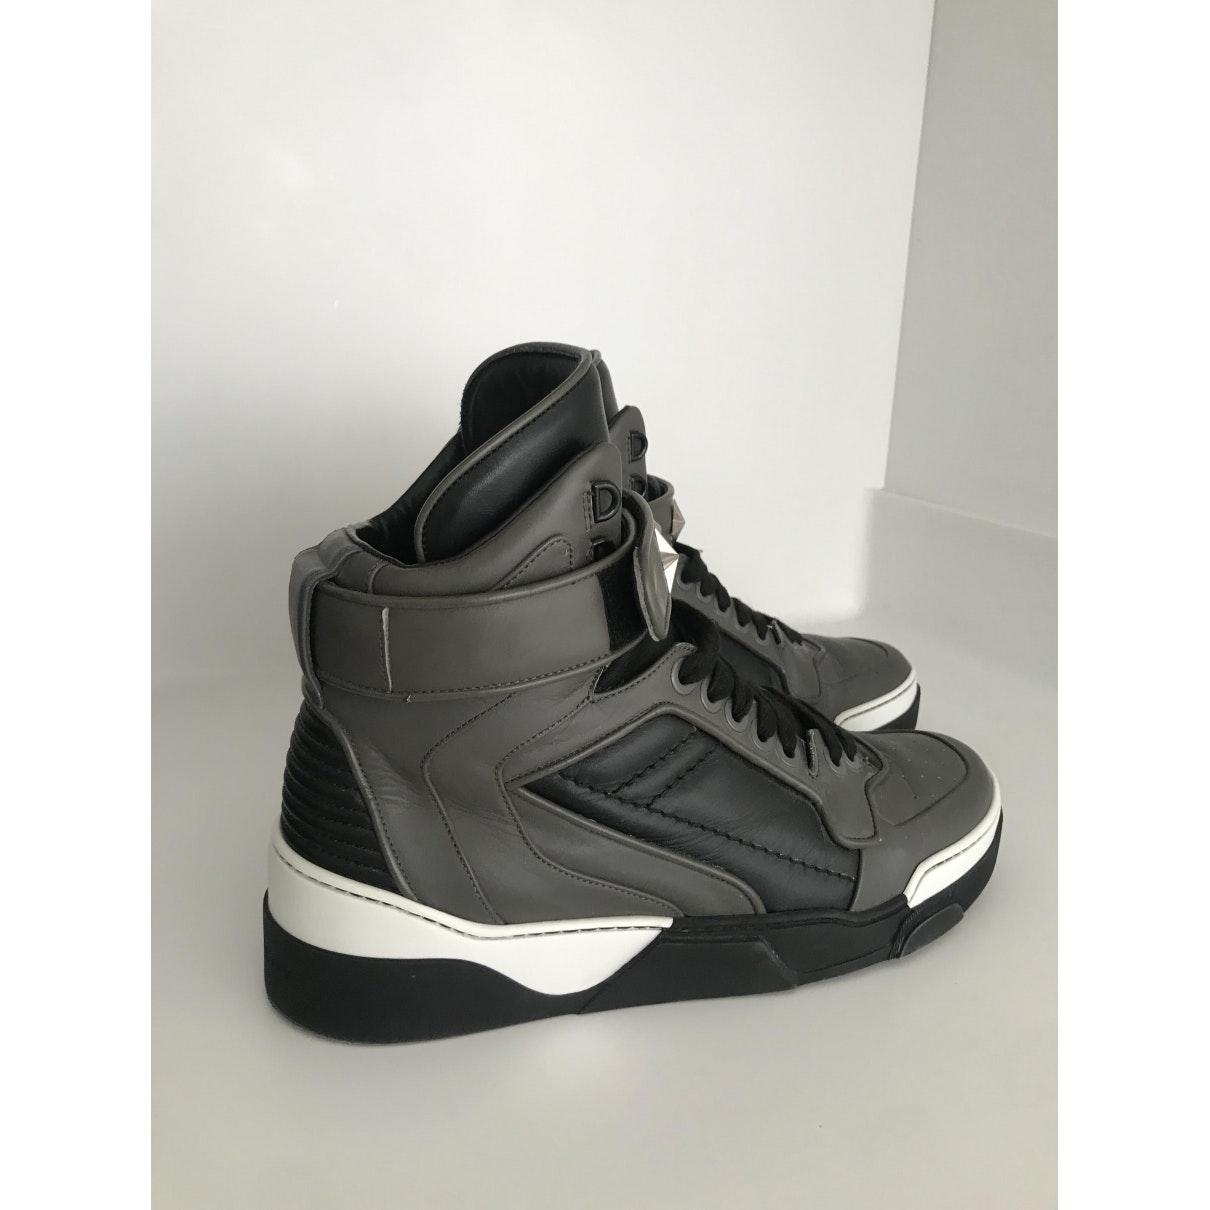 Givenchy Tyson Grey Leather Trainers in Gray for Men - Lyst